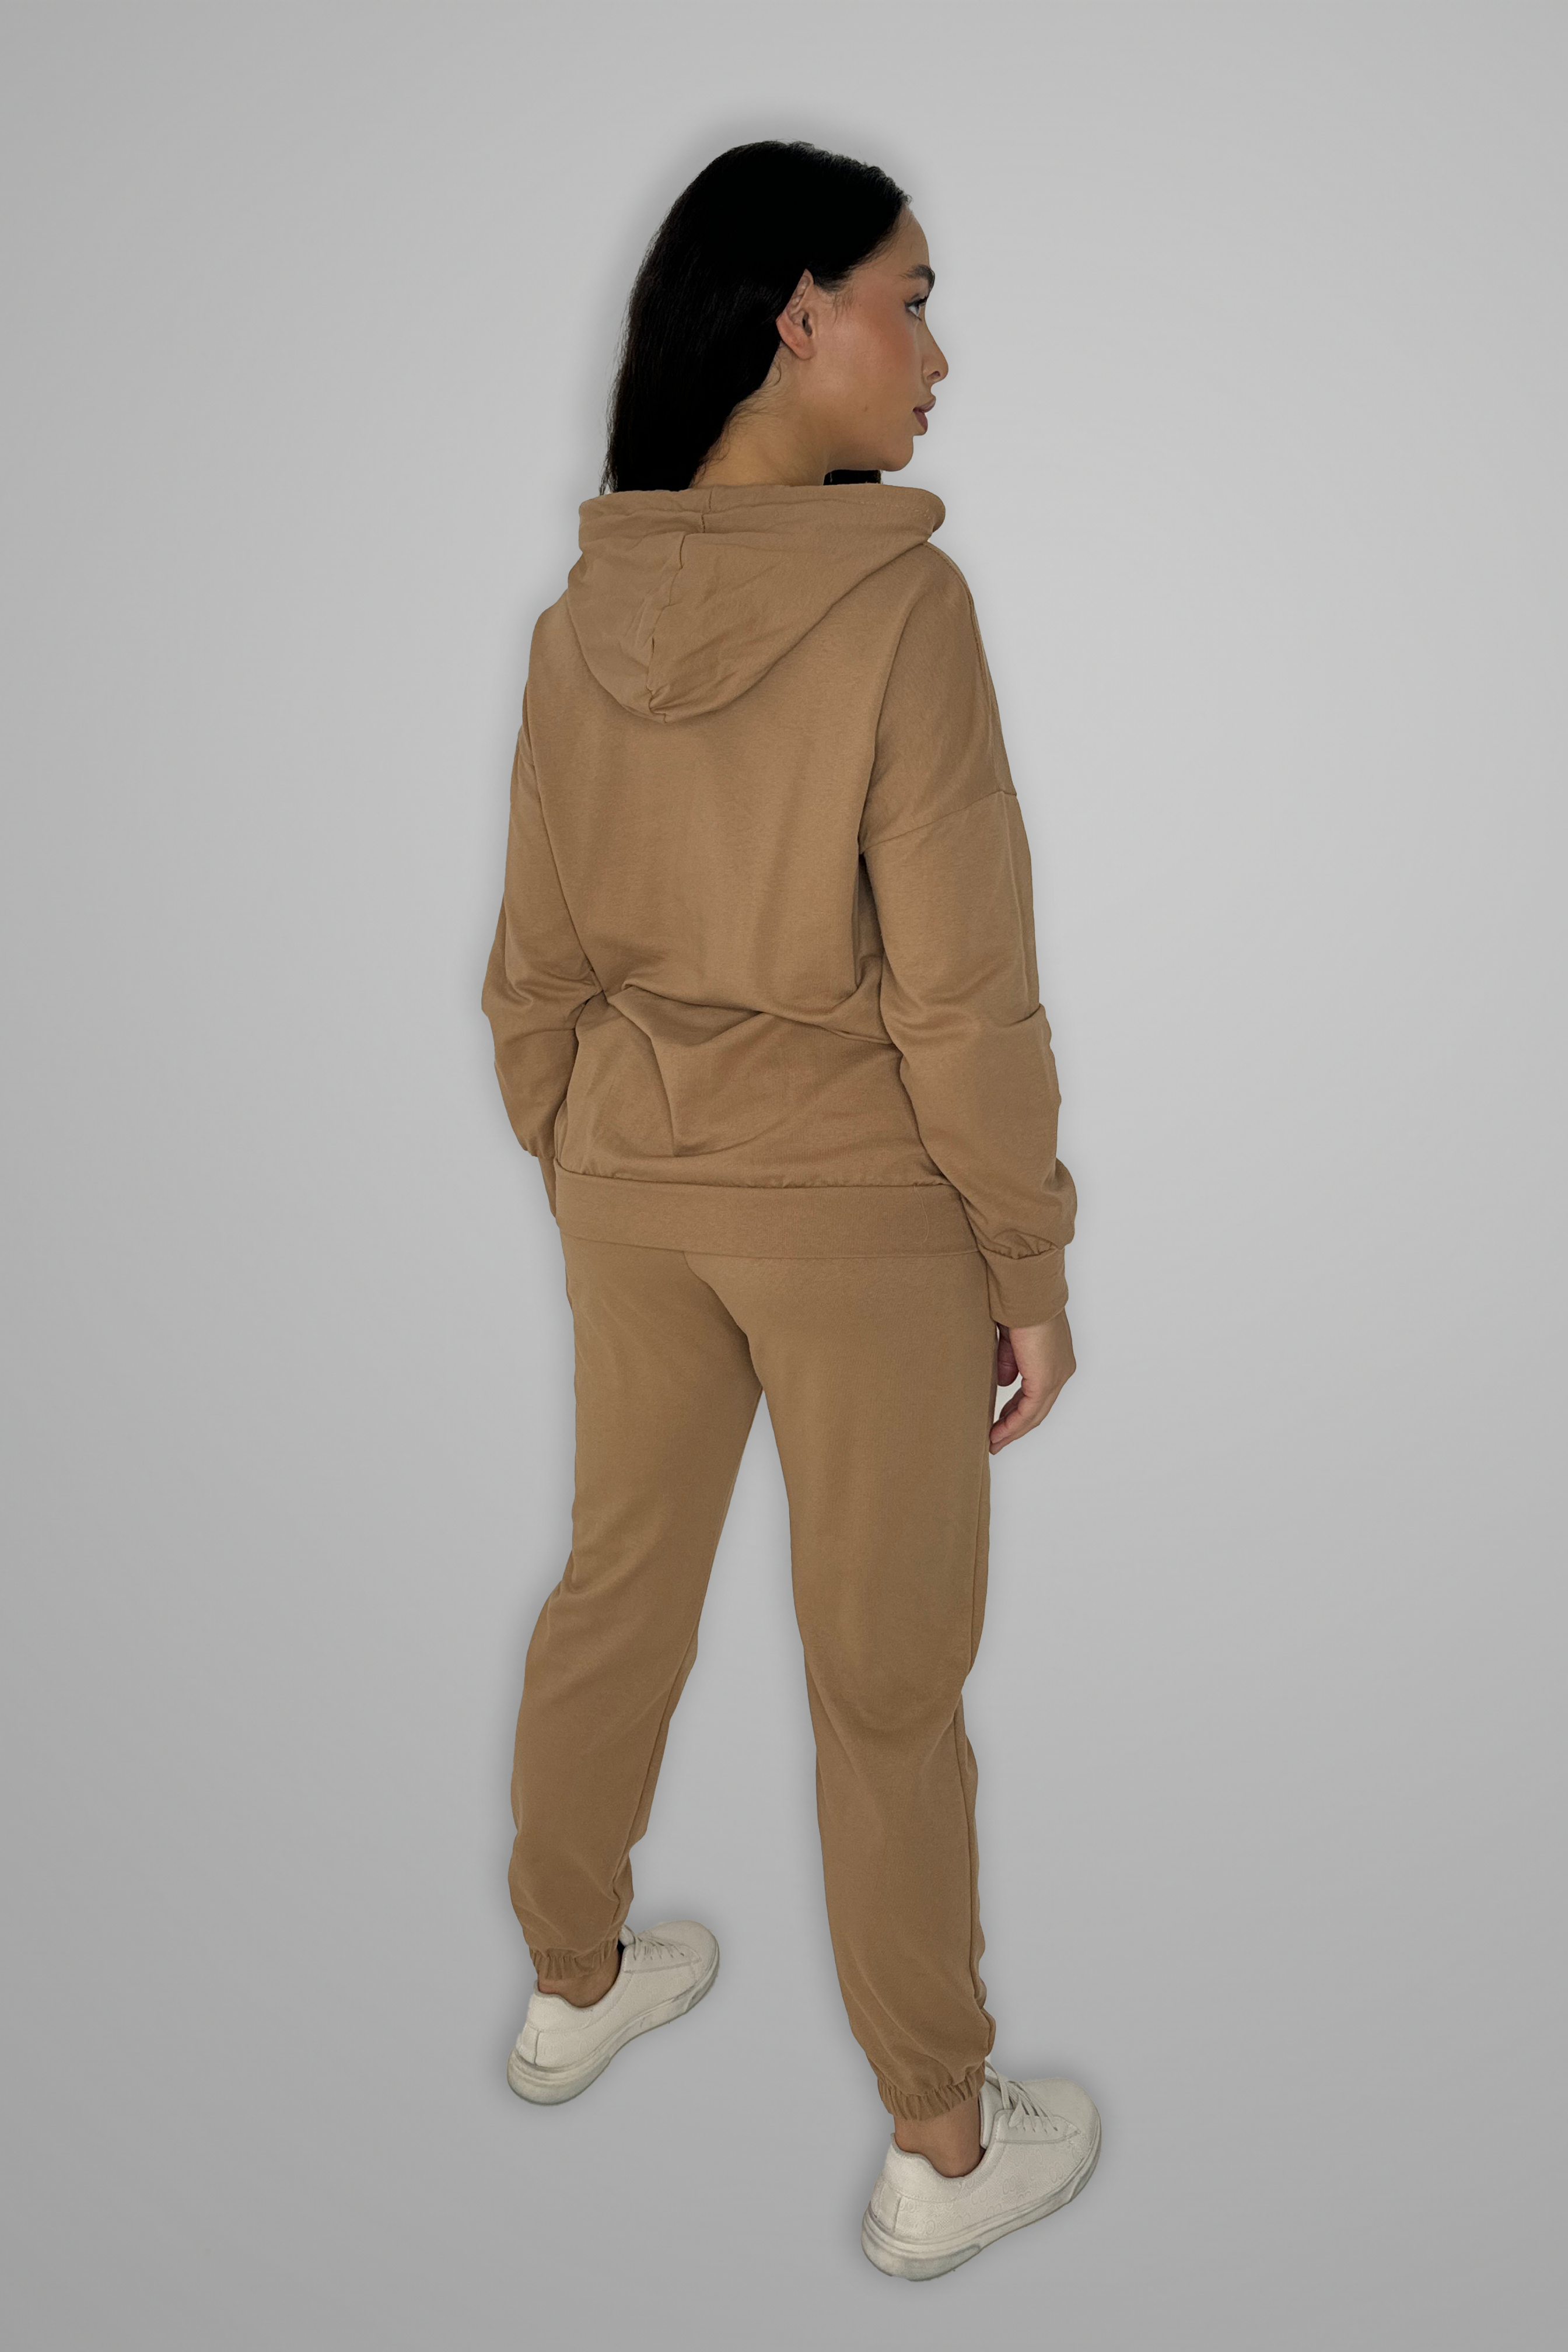 Hooded Drawstring Sweatshirt And Joggers Tracksuit